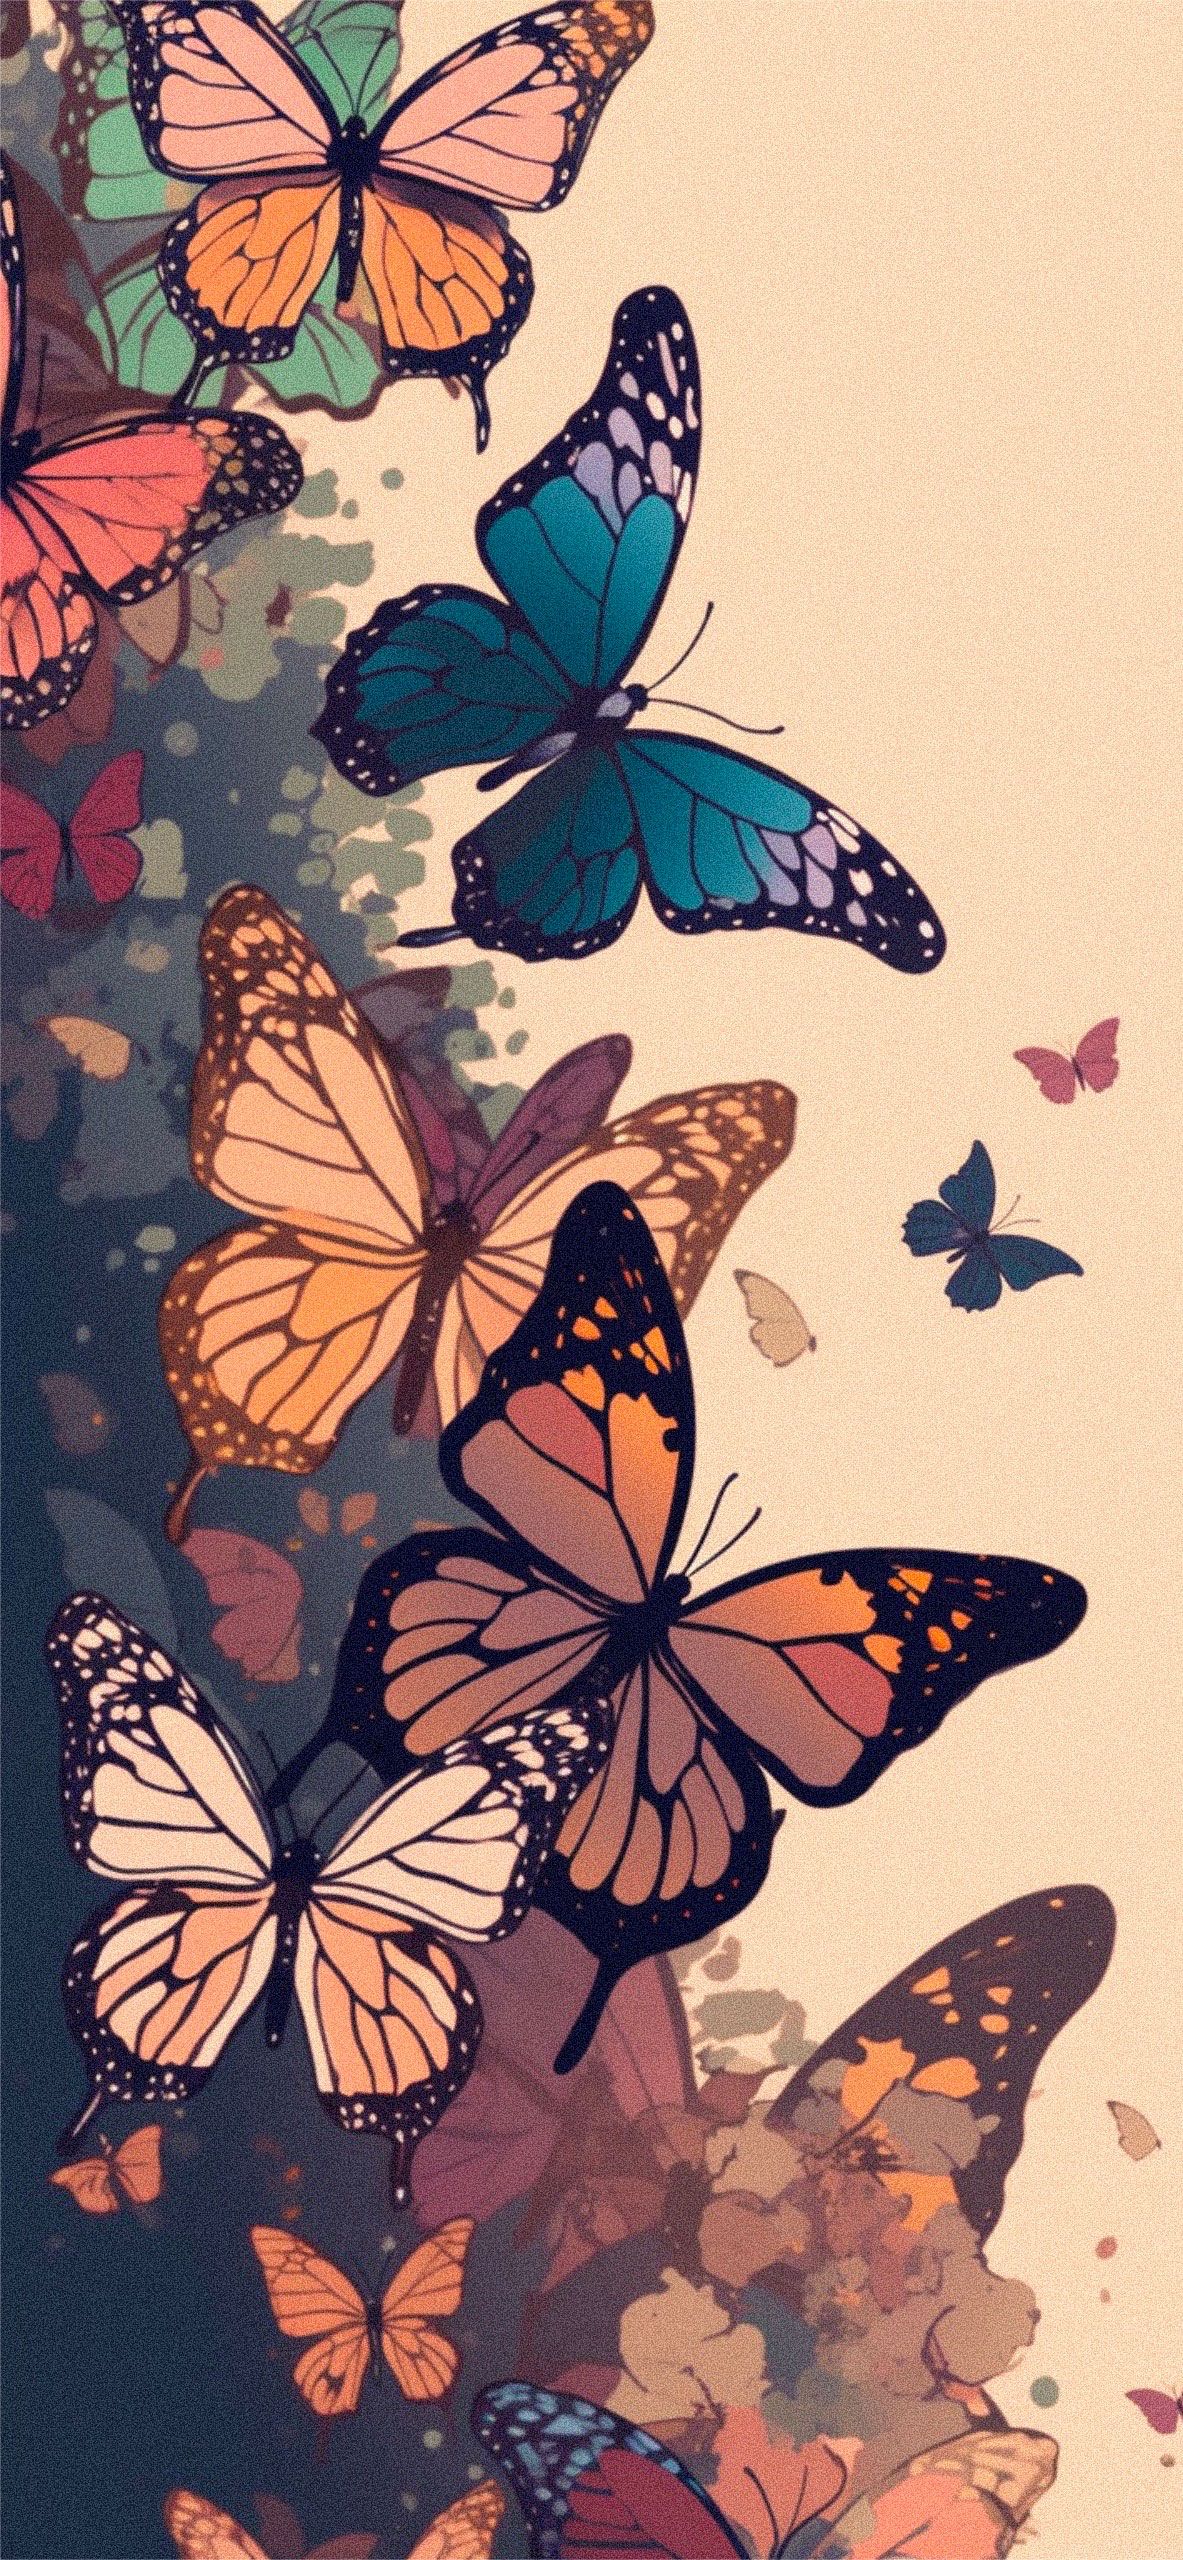 IPhone wallpaper of a painting of butterflies in orange, blue, and pink - Butterfly